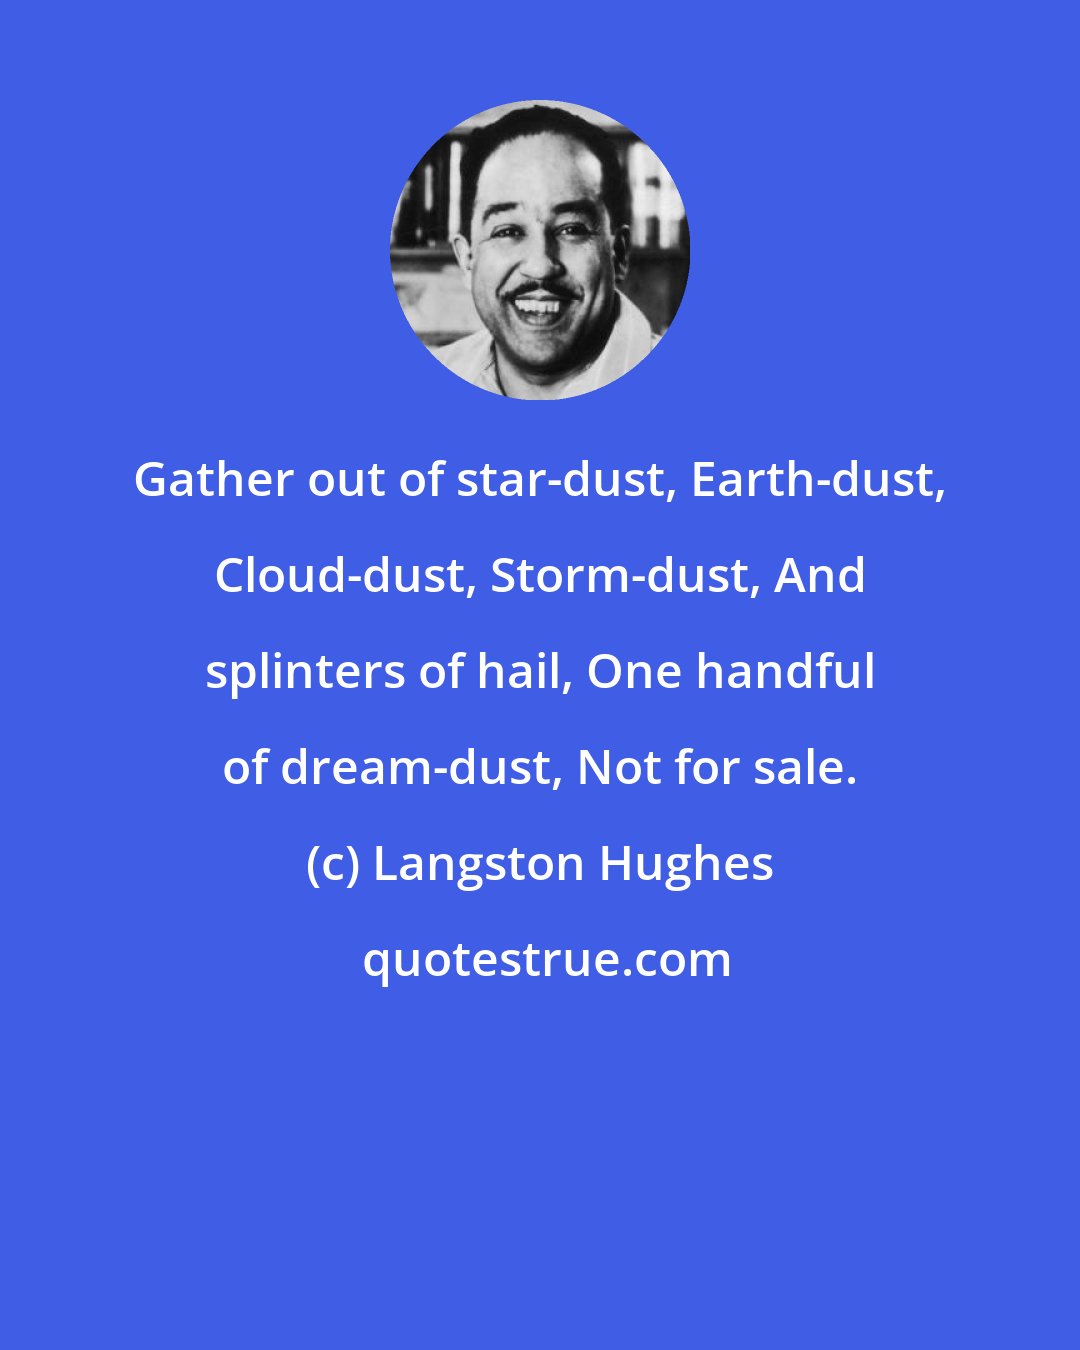 Langston Hughes: Gather out of star-dust, Earth-dust, Cloud-dust, Storm-dust, And splinters of hail, One handful of dream-dust, Not for sale.